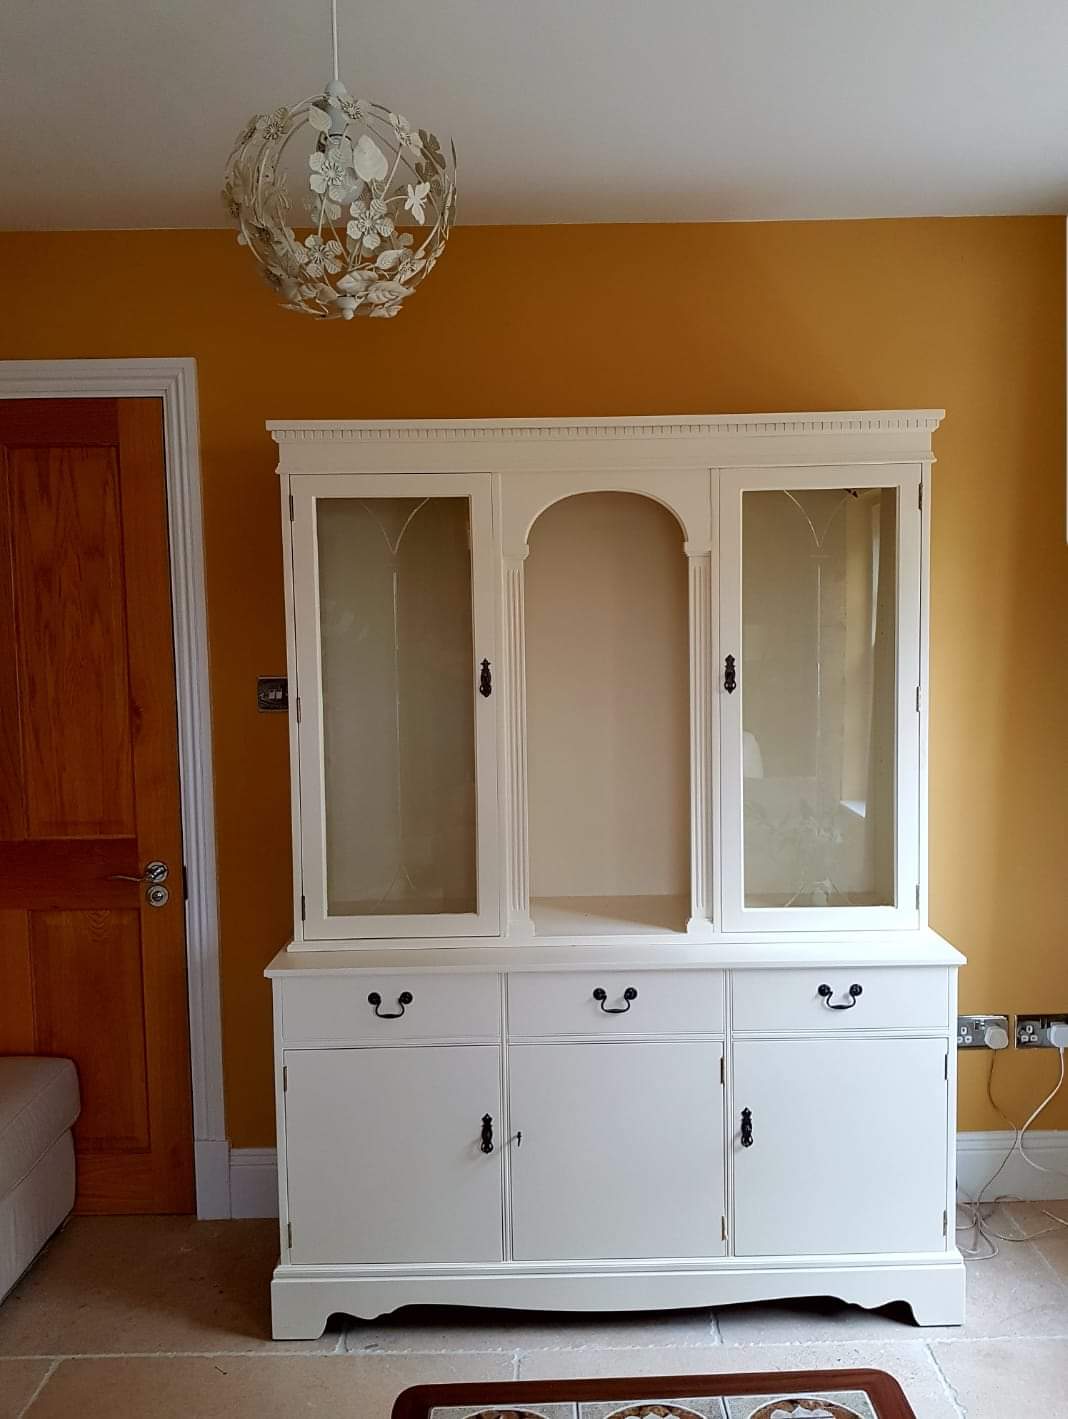 Spray painted dresser matched to kitchen colours and decor interior design